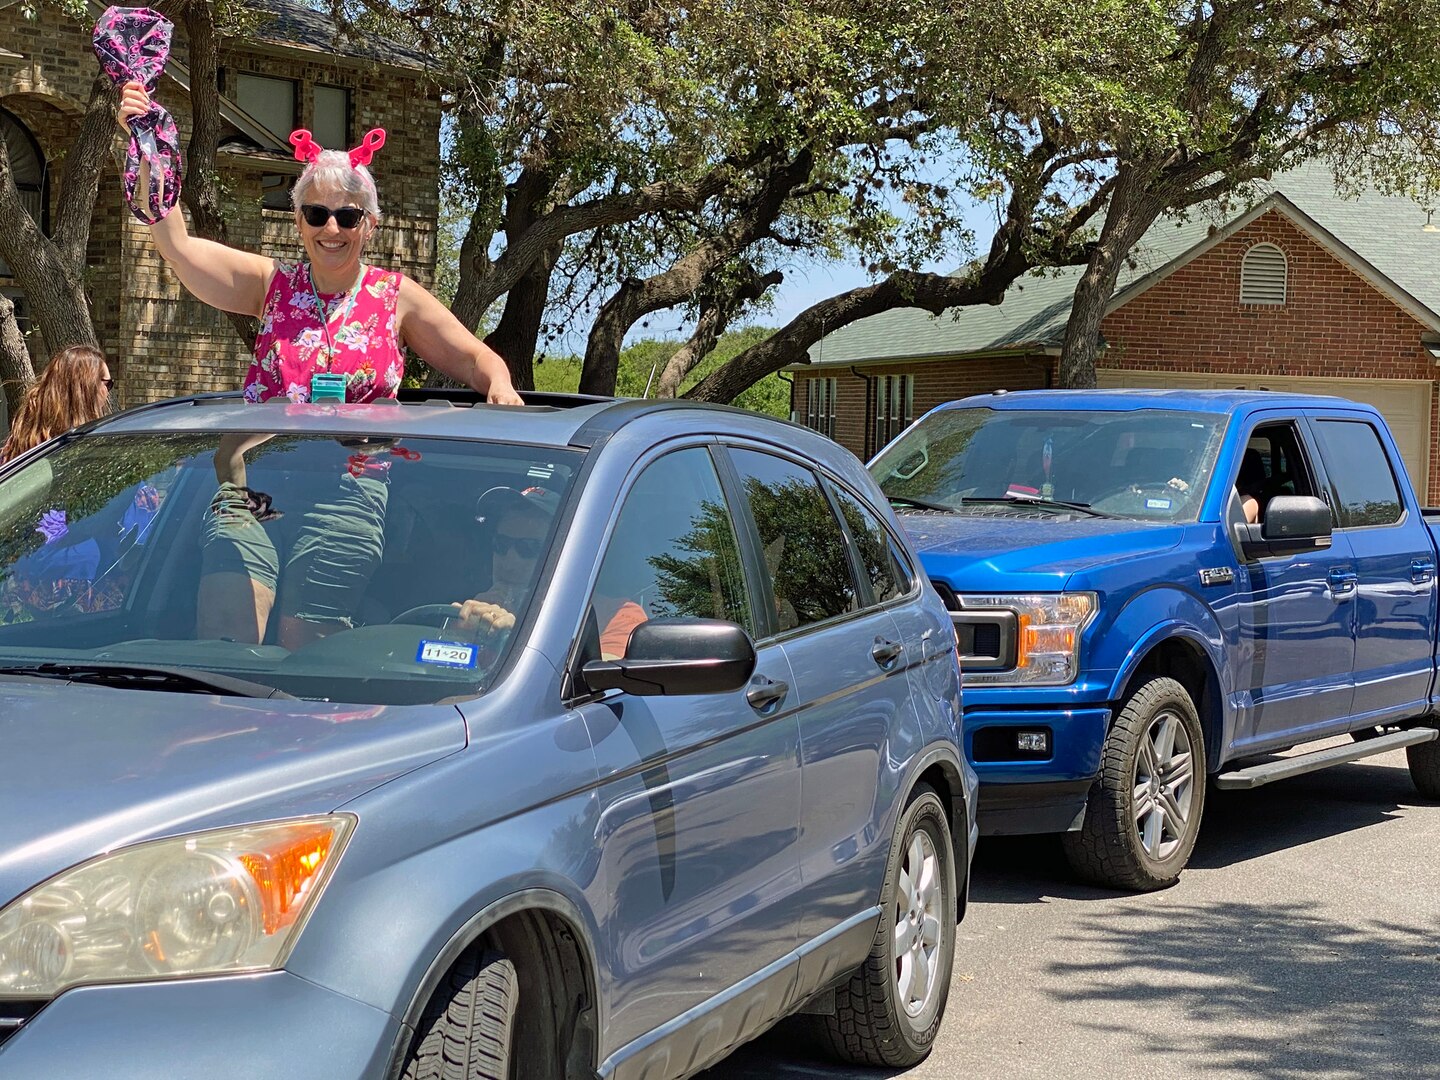 Neighbors thank organizer with surprise parade after COVID-19